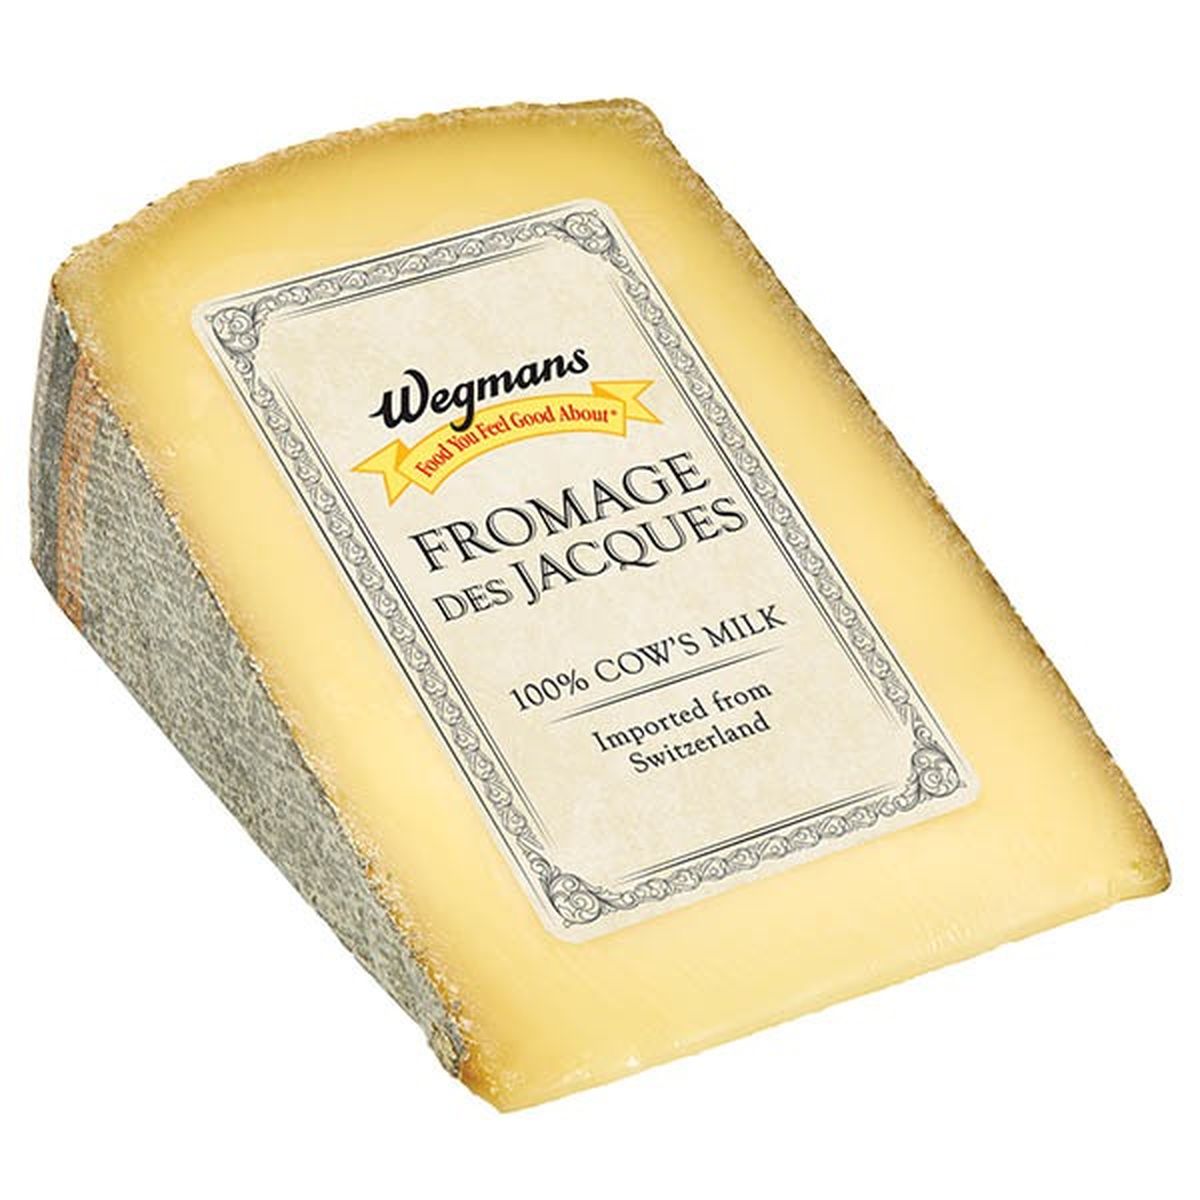 Calories in Wegmans Cheese, Fromage des Jacques